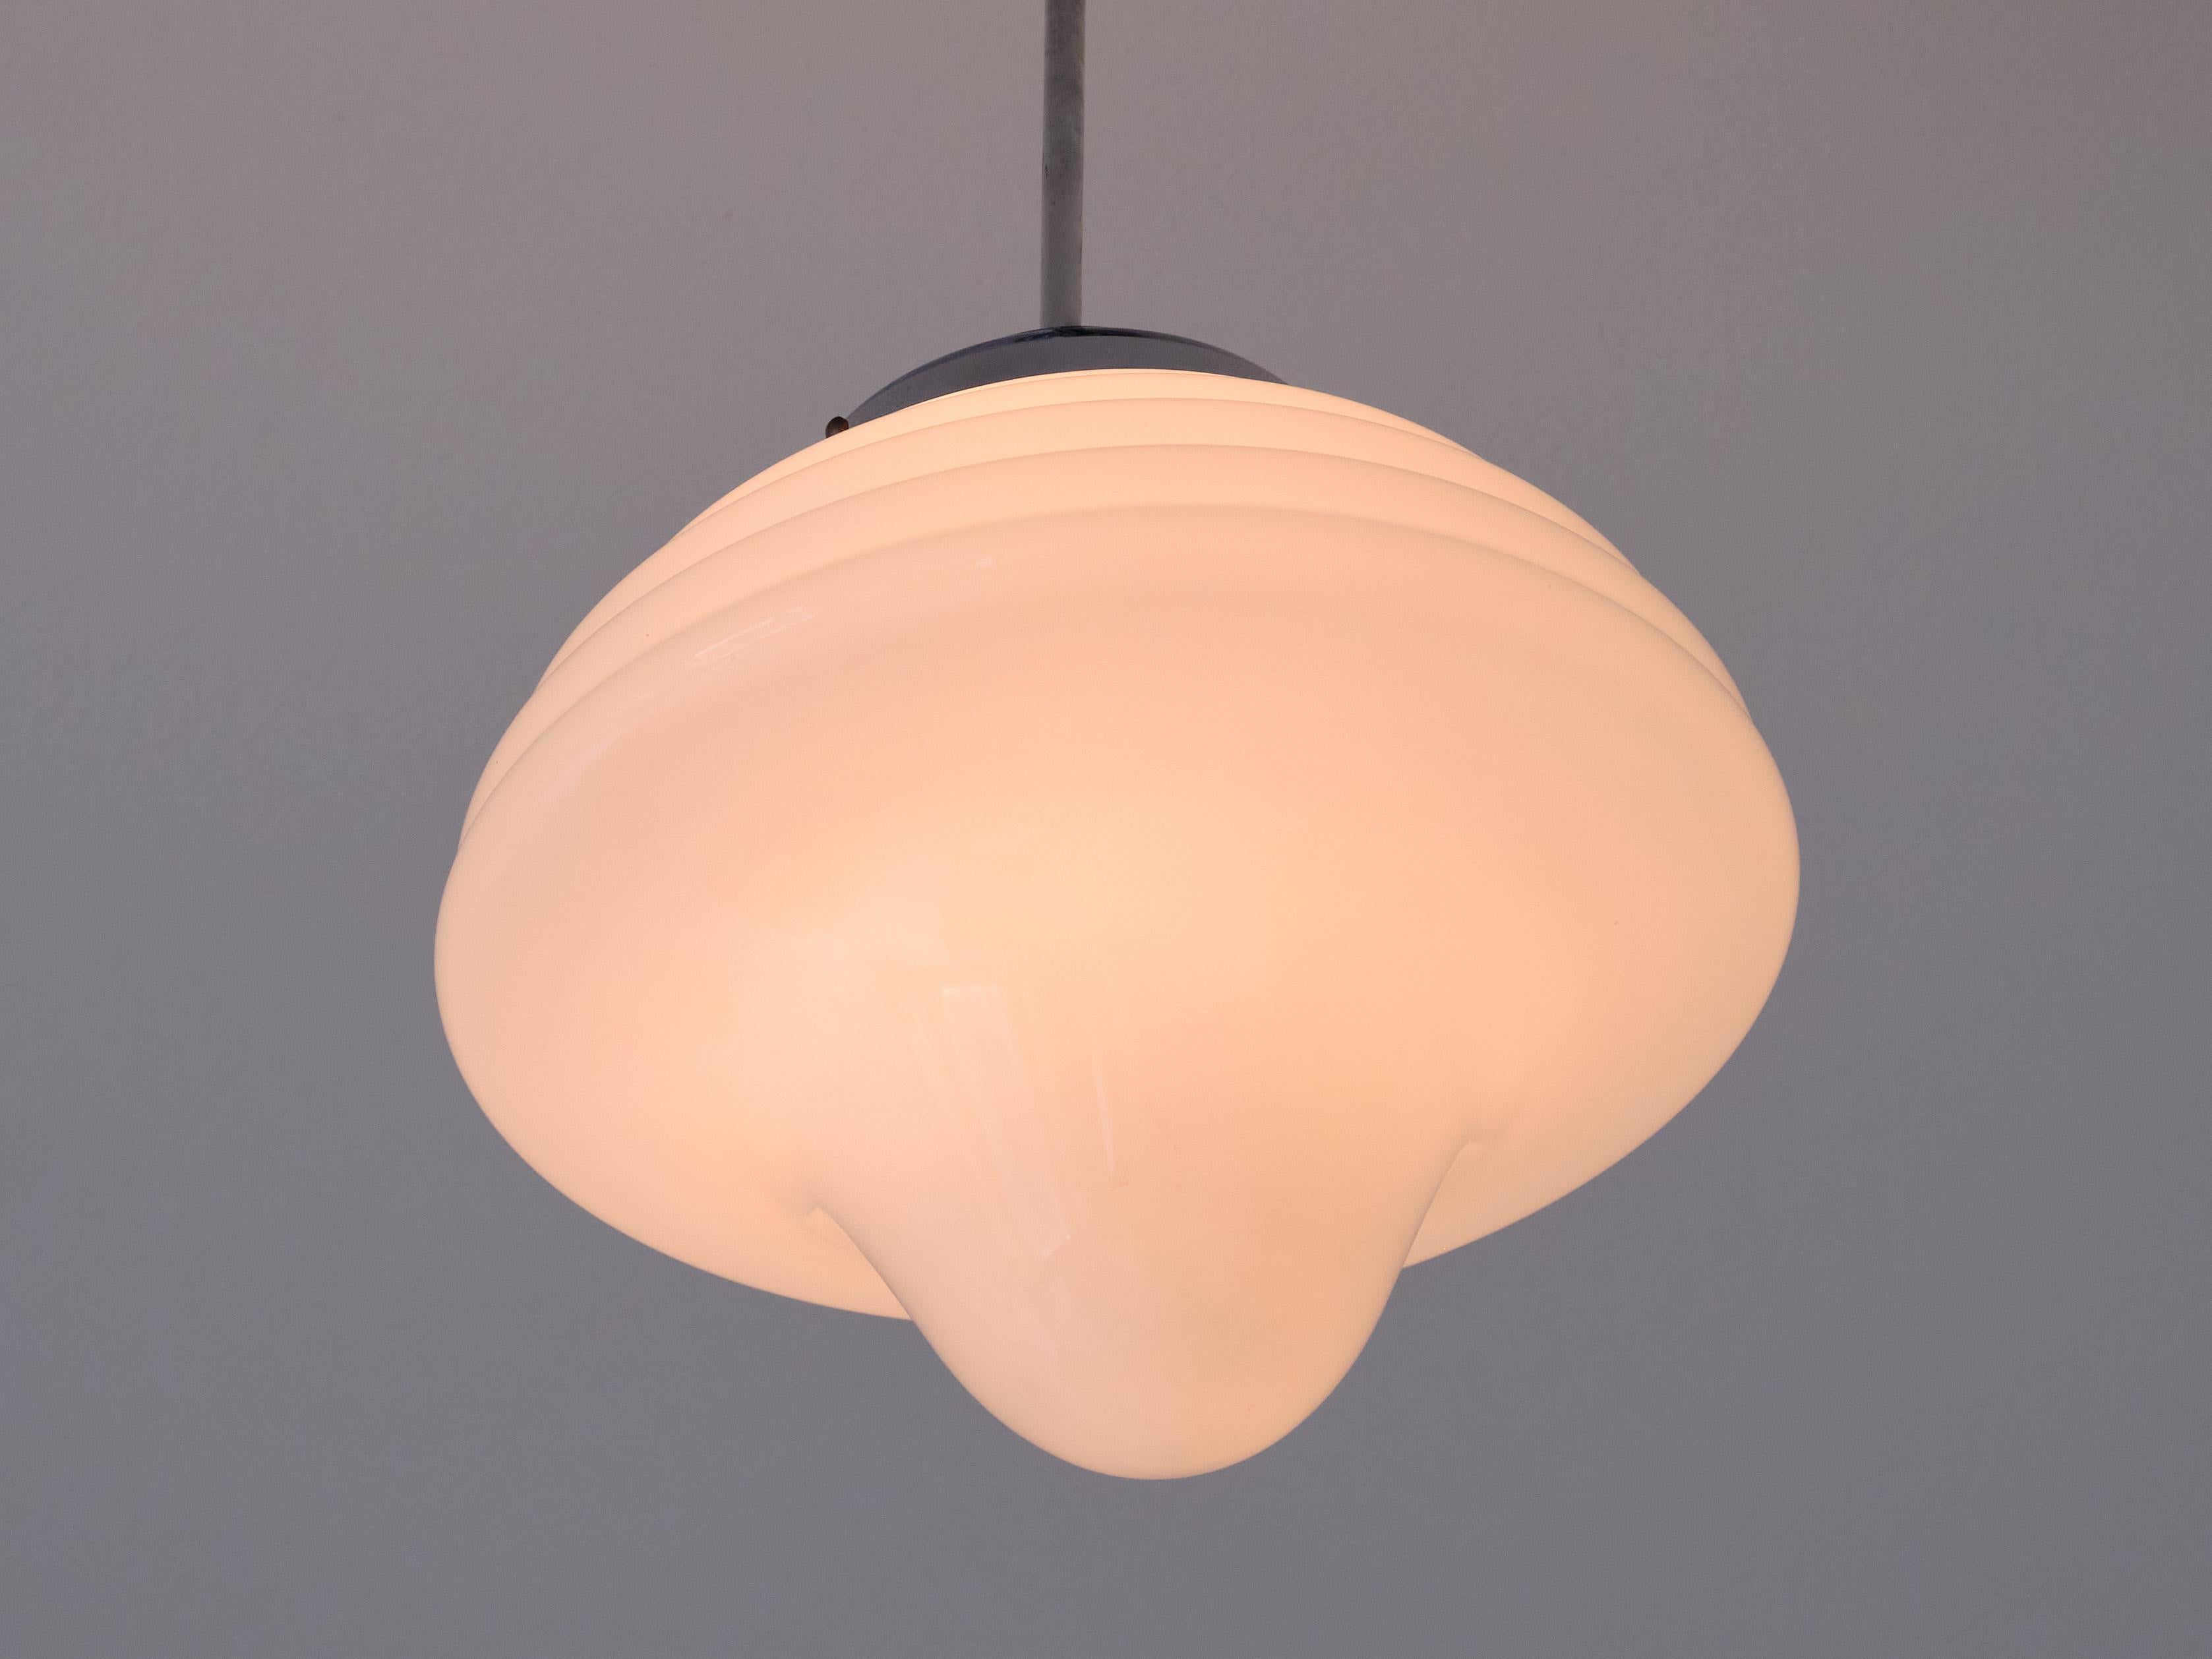 Art Deco Drop Shaped Pendant Light in Opal Glass and Nickel, Netherlands, 1930s For Sale 2